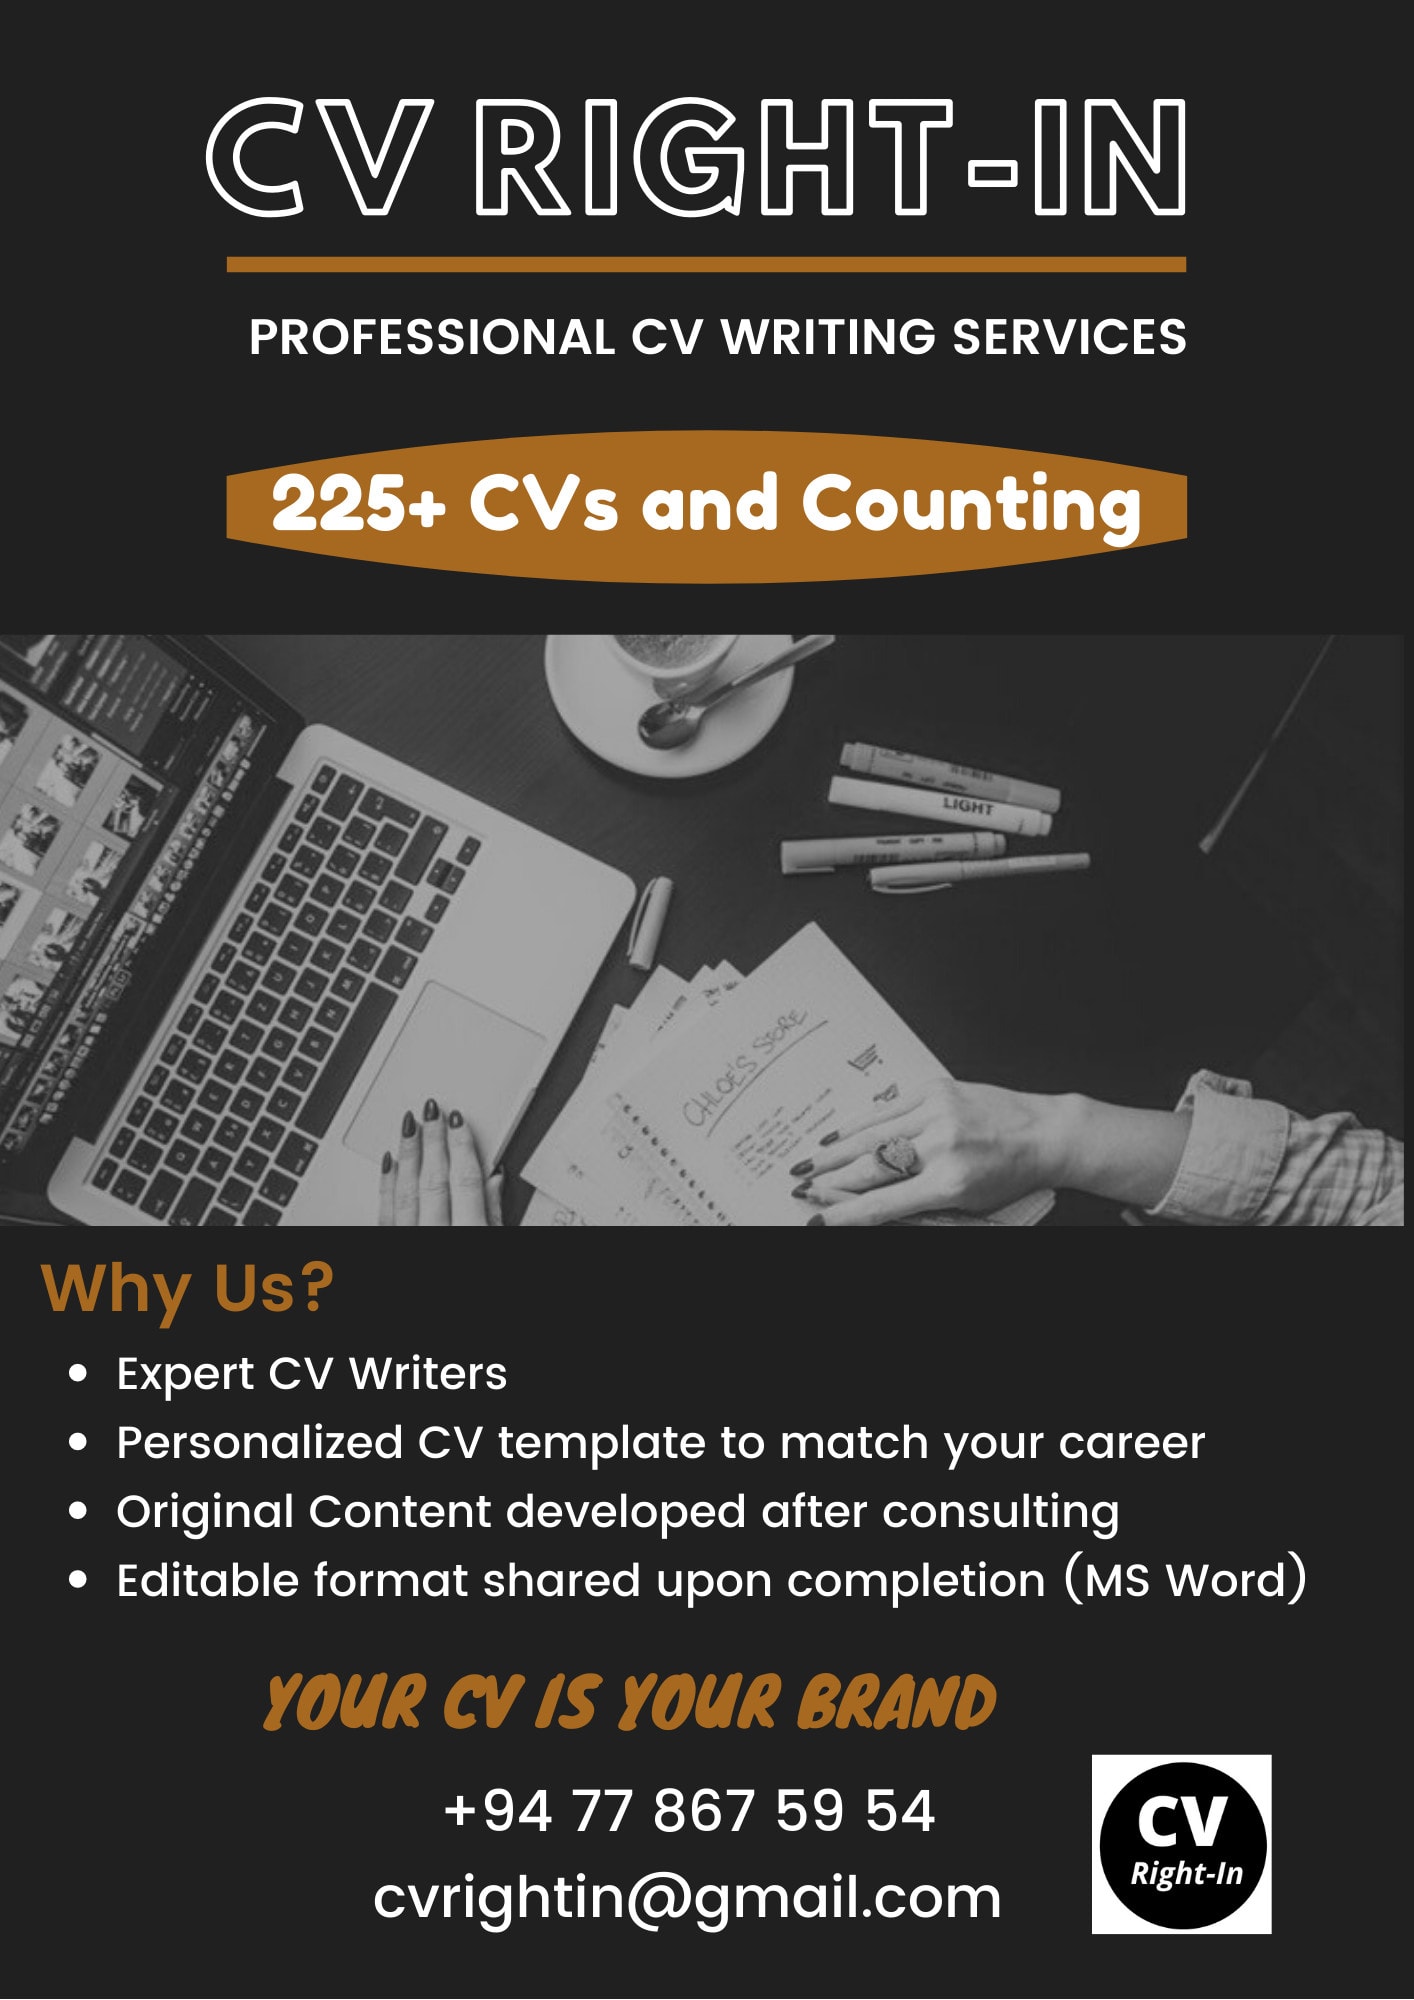 career writing services